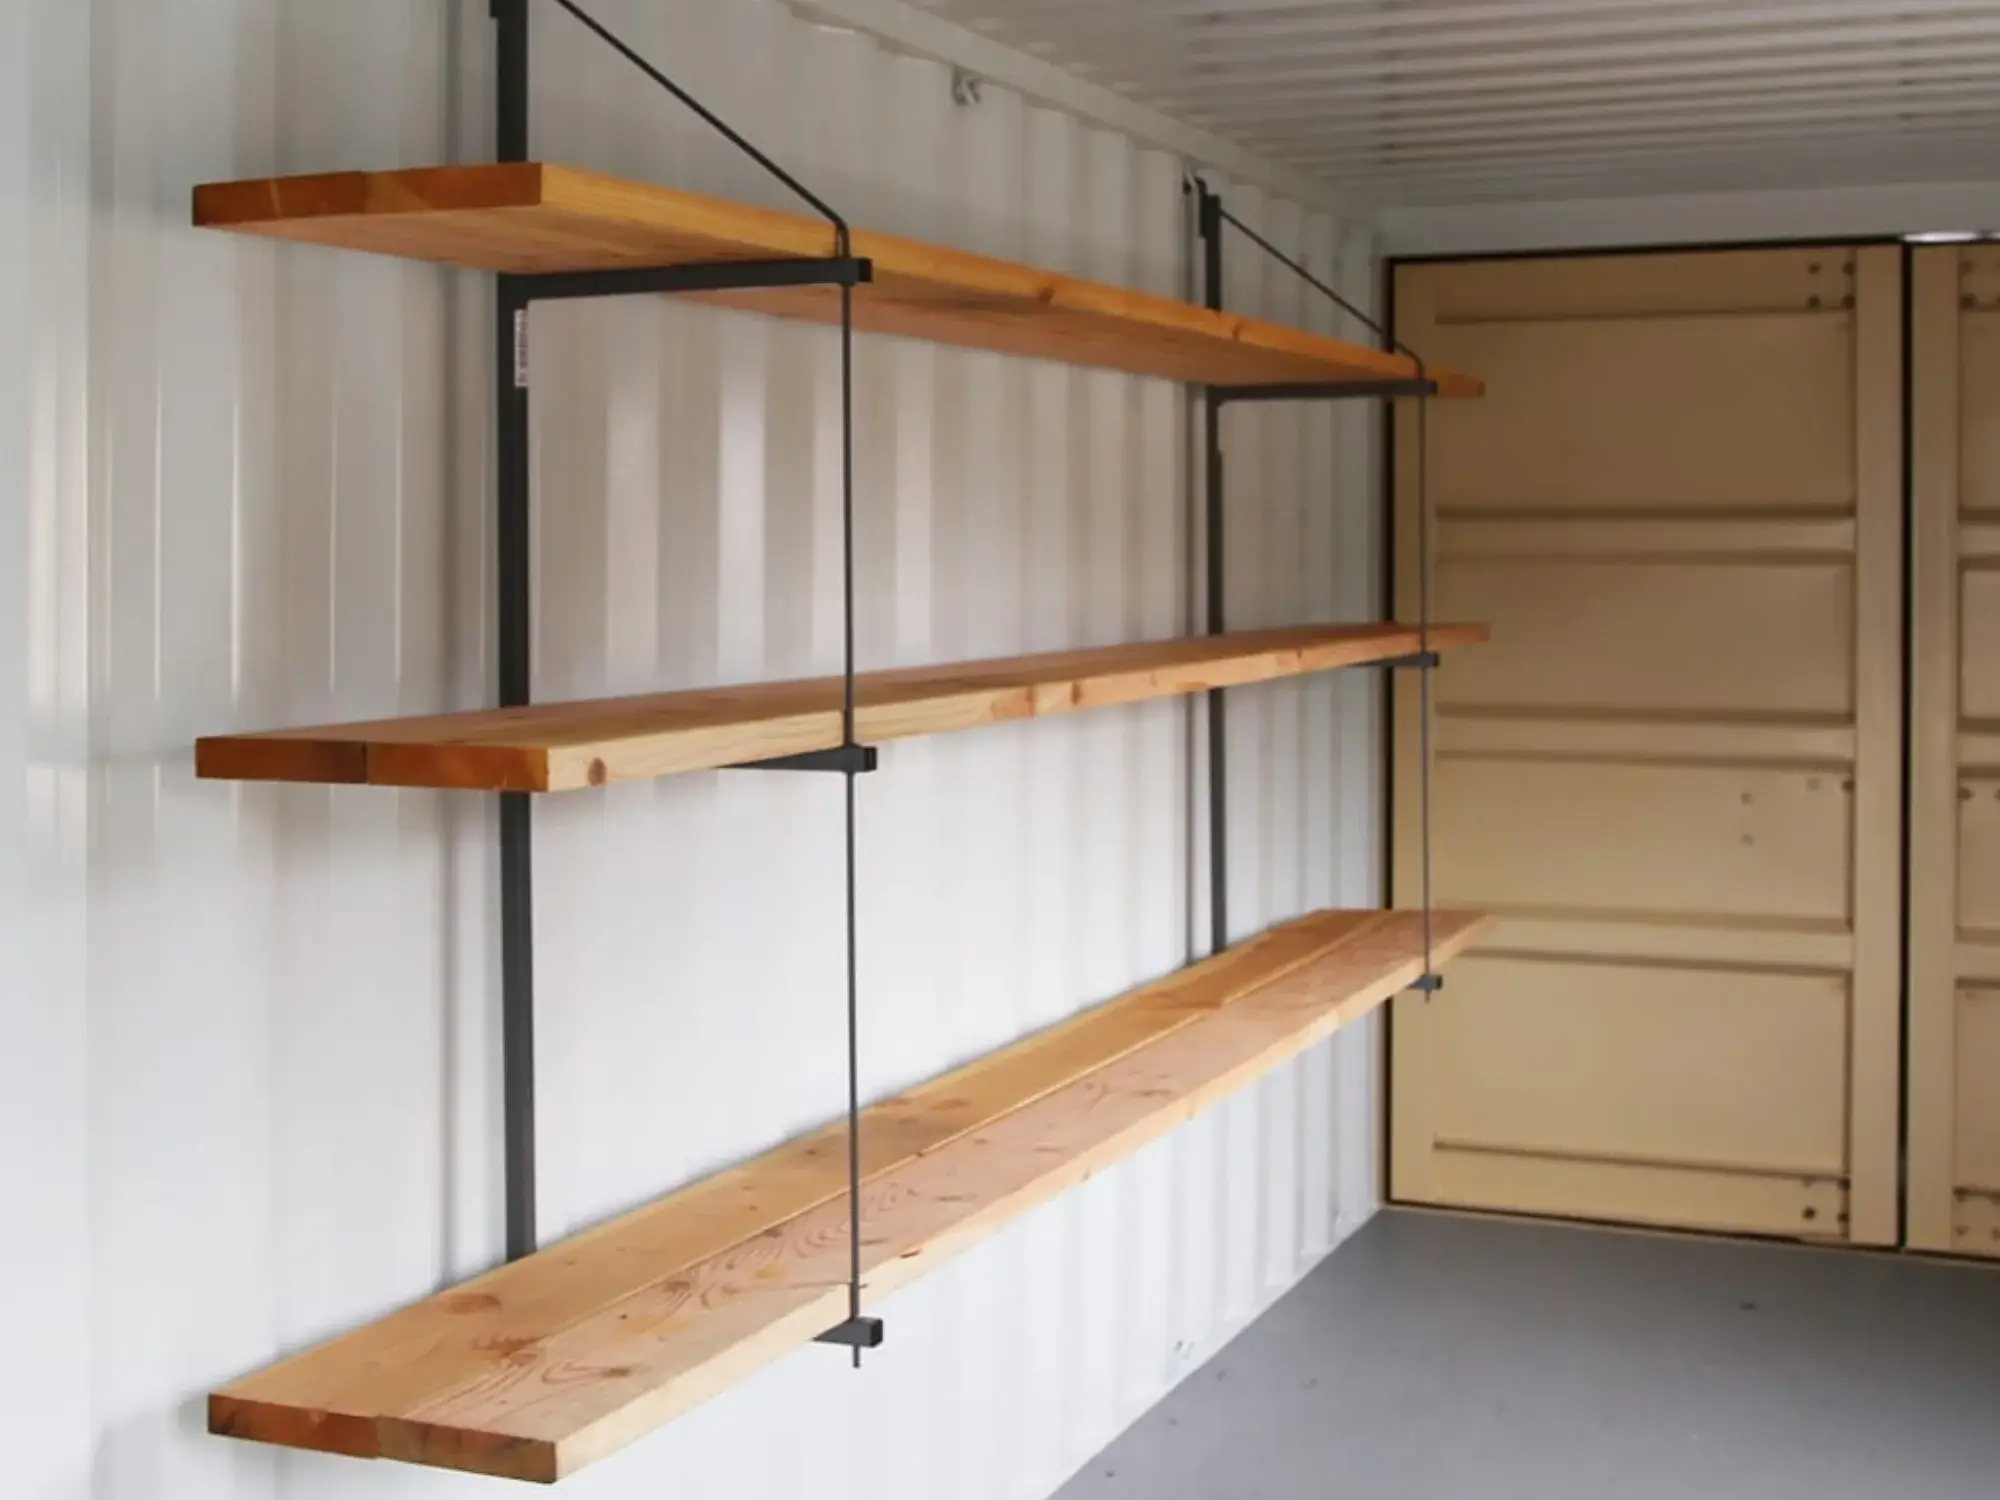 Storage Containers Shelves